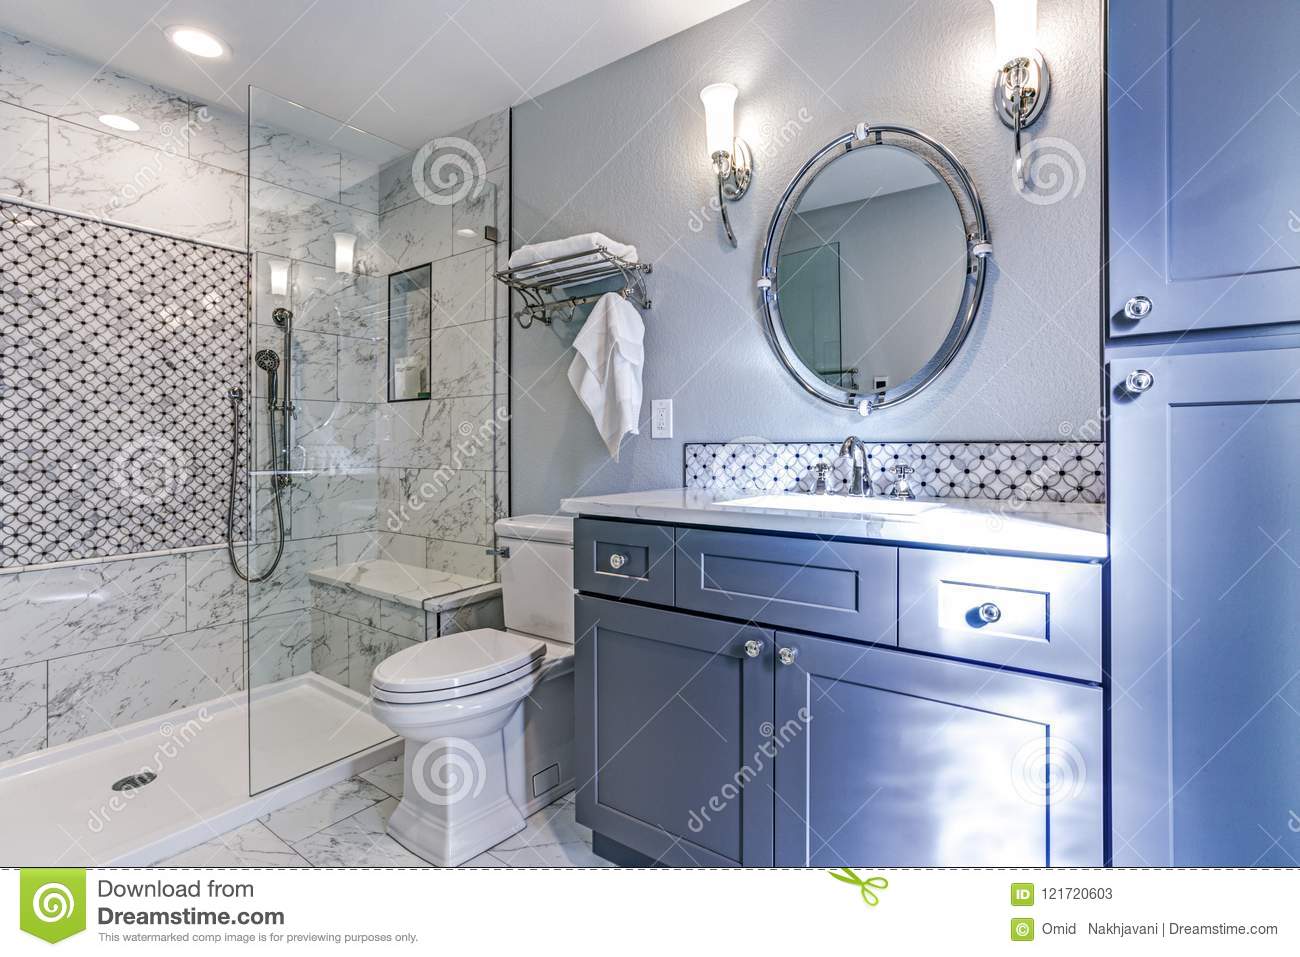 How Much Does a Home Depot Bathroom Remodel Cost?